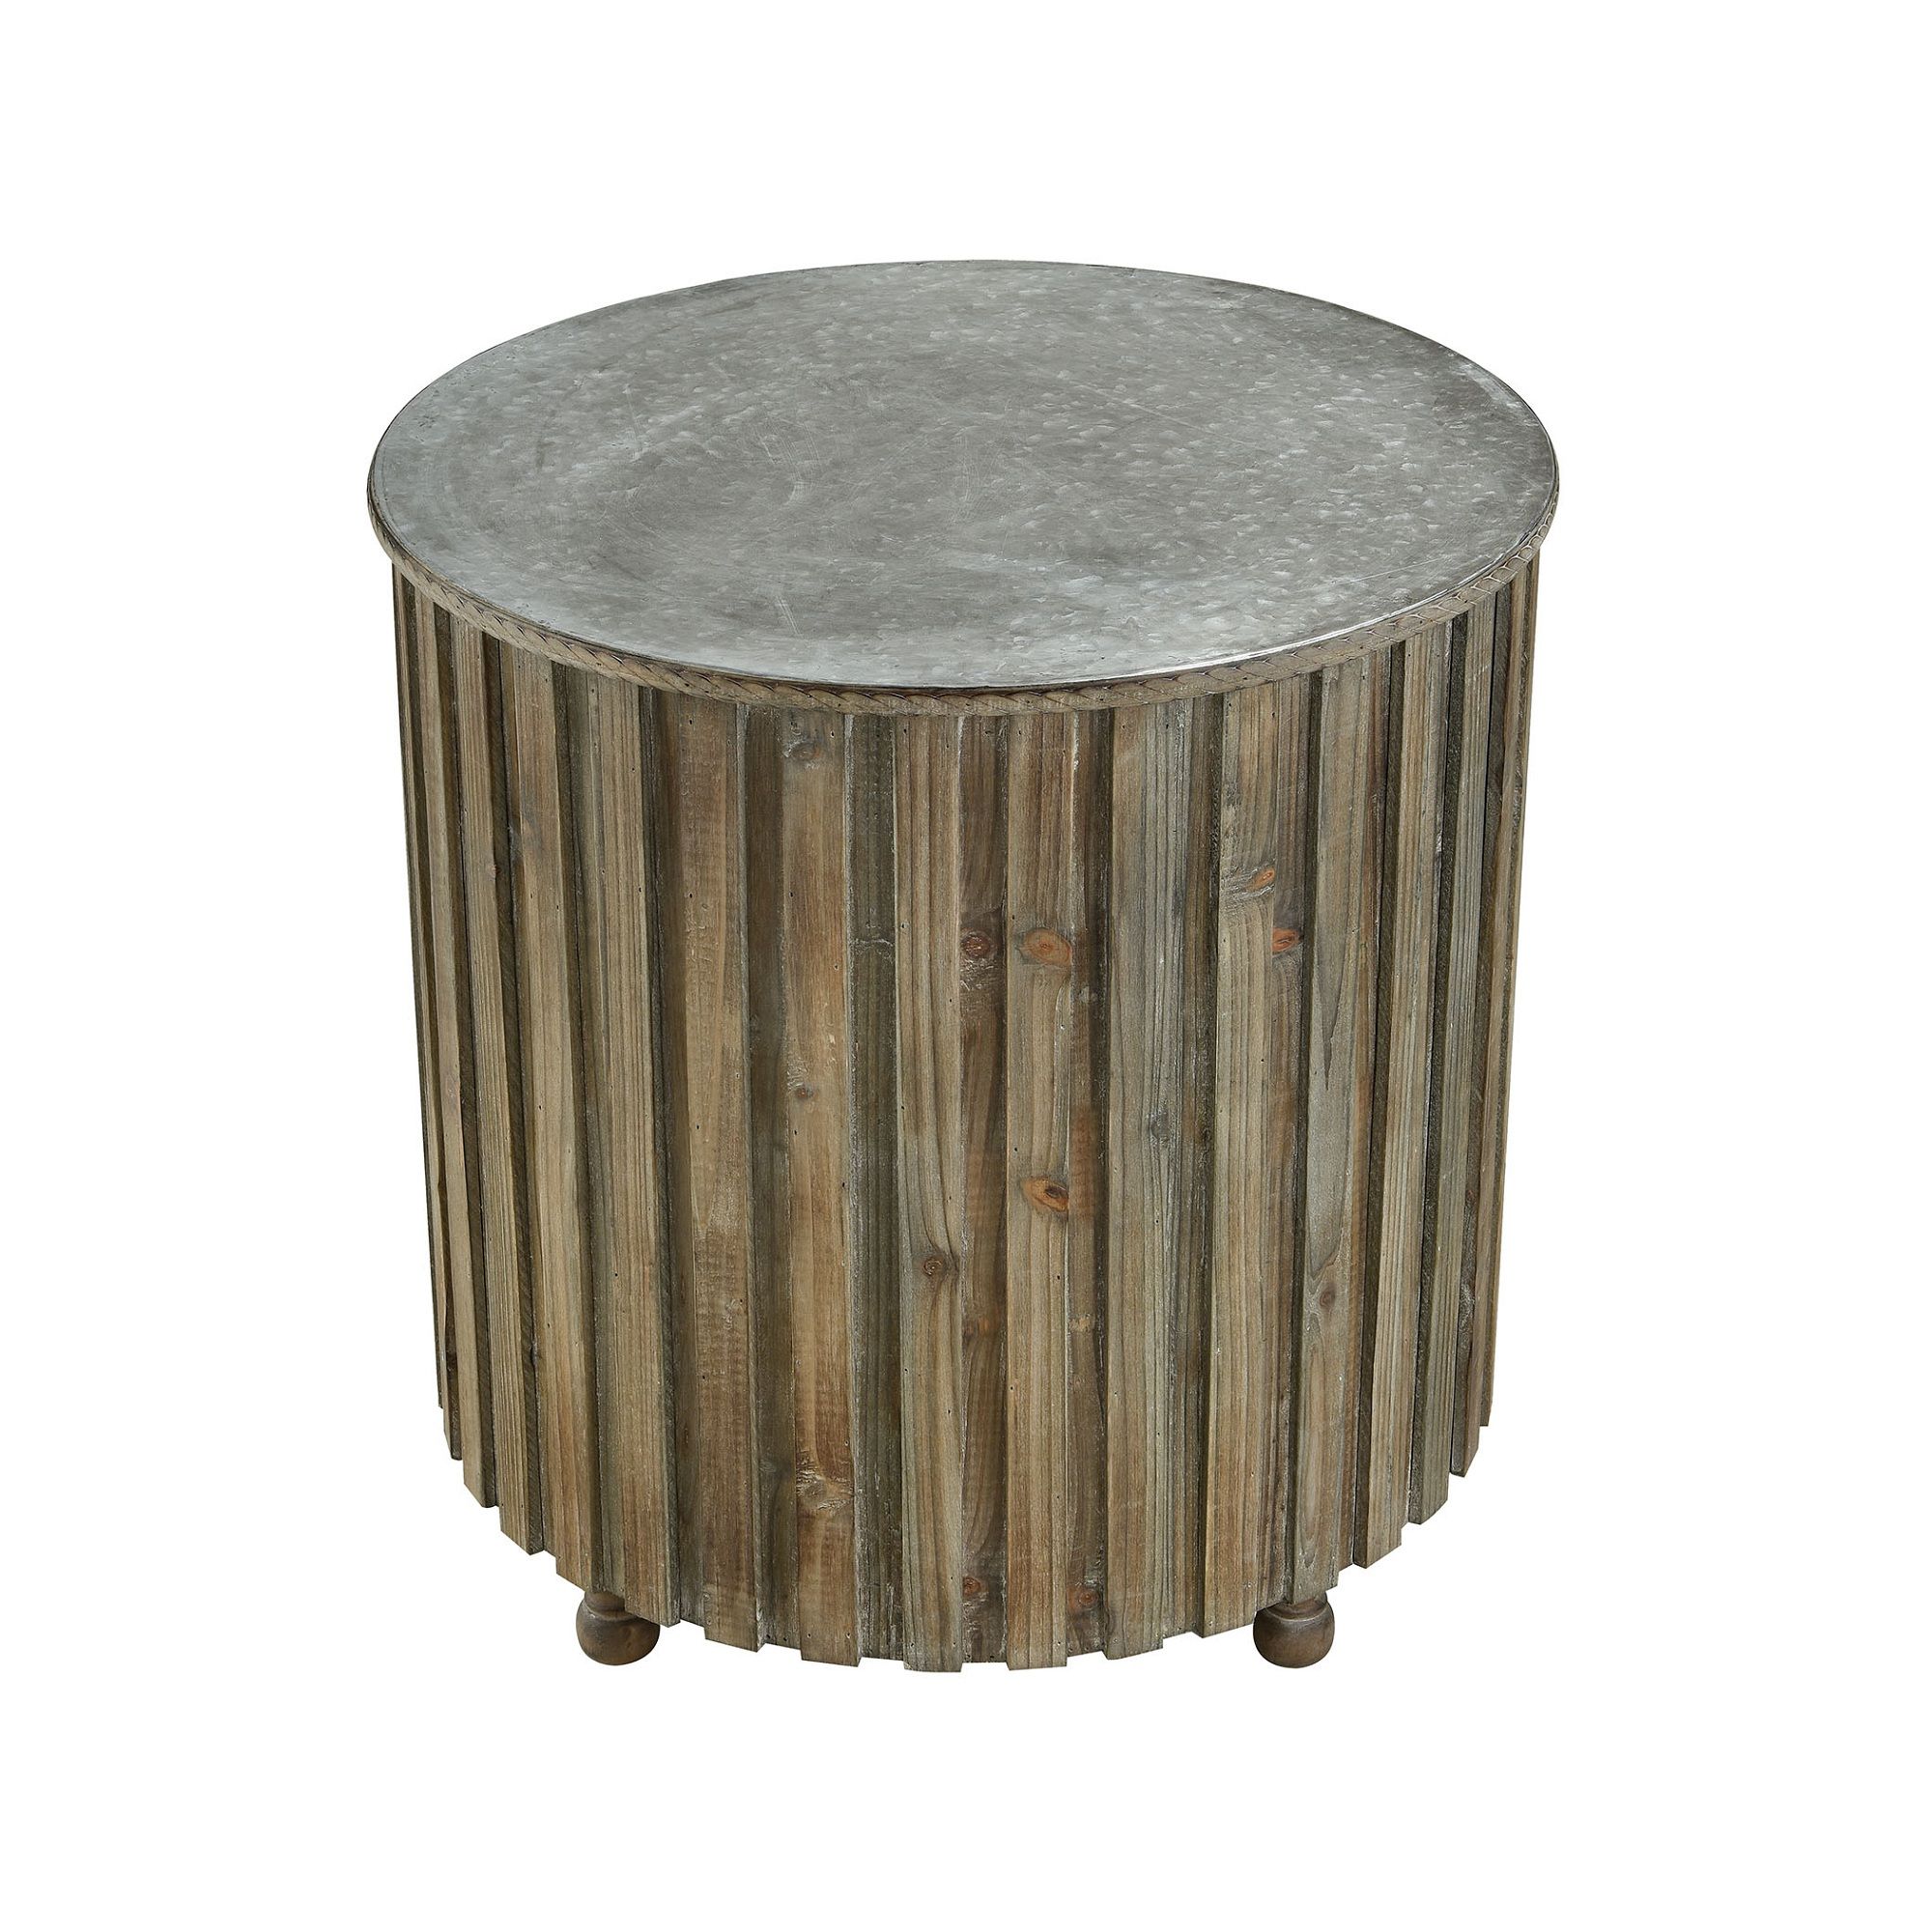 Drum Shaped Outdoor Tables Intended For 2020  (View 15 of 15)